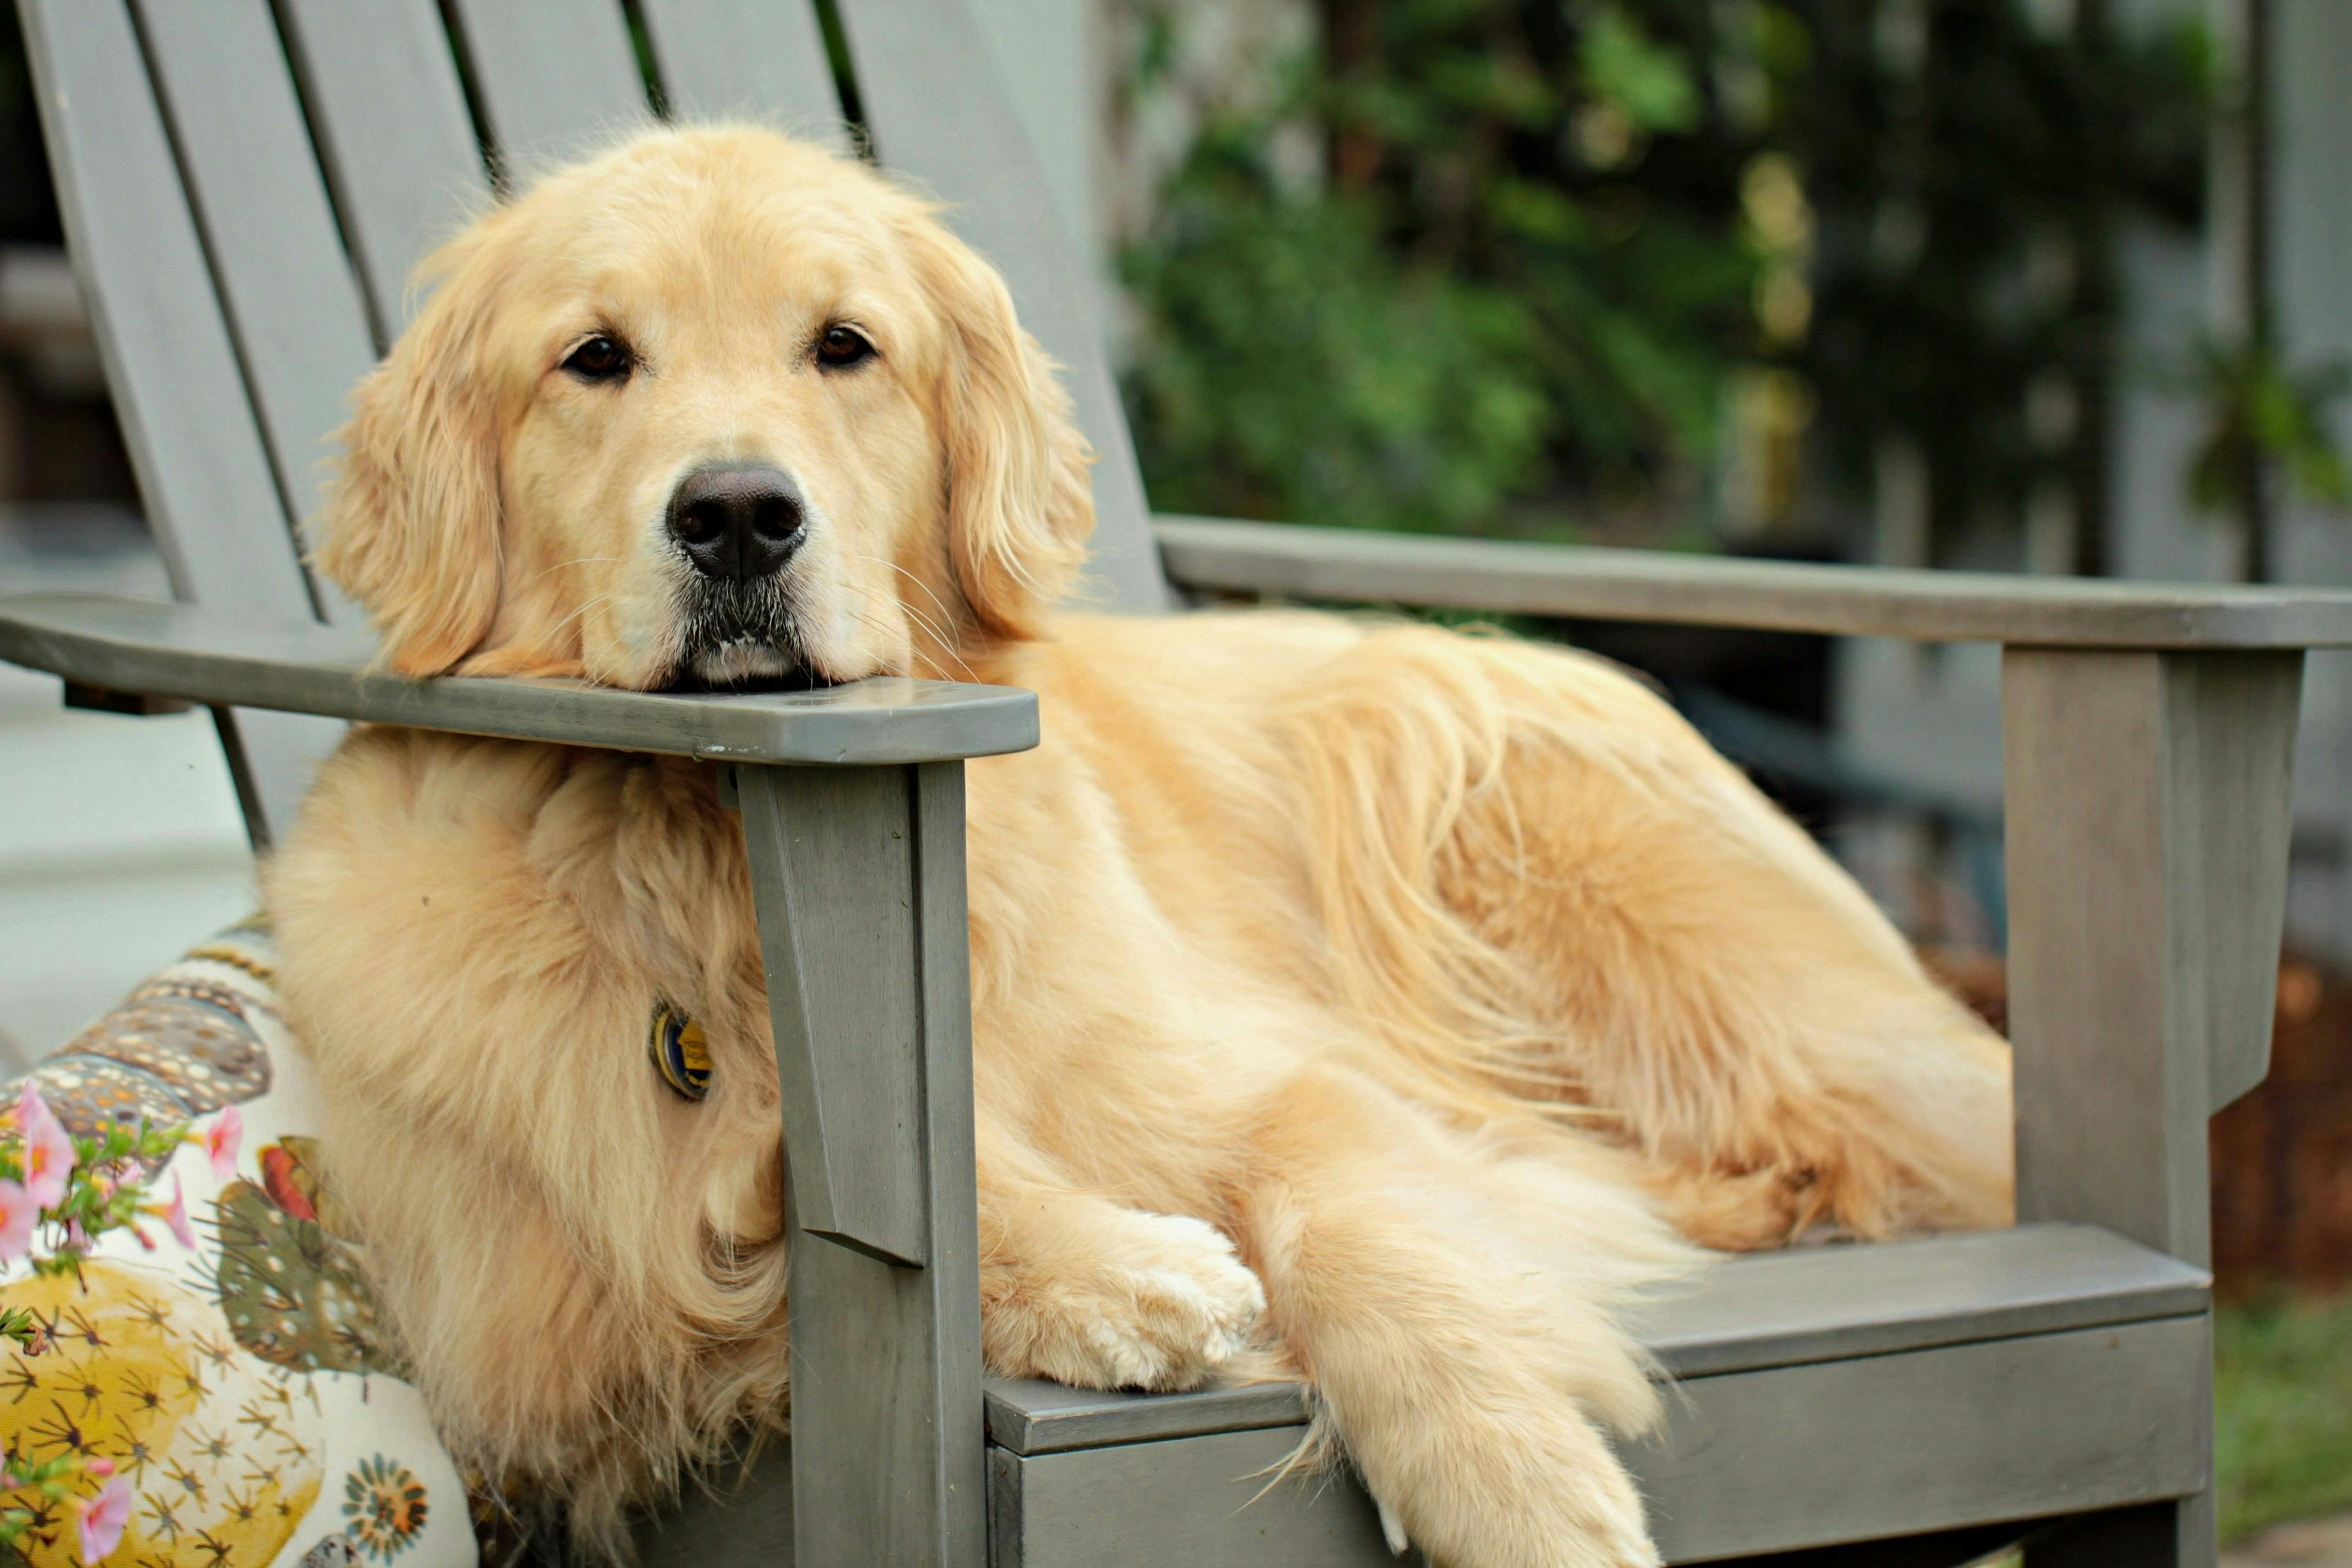 Golden Retriever lounging in a car on the patio.